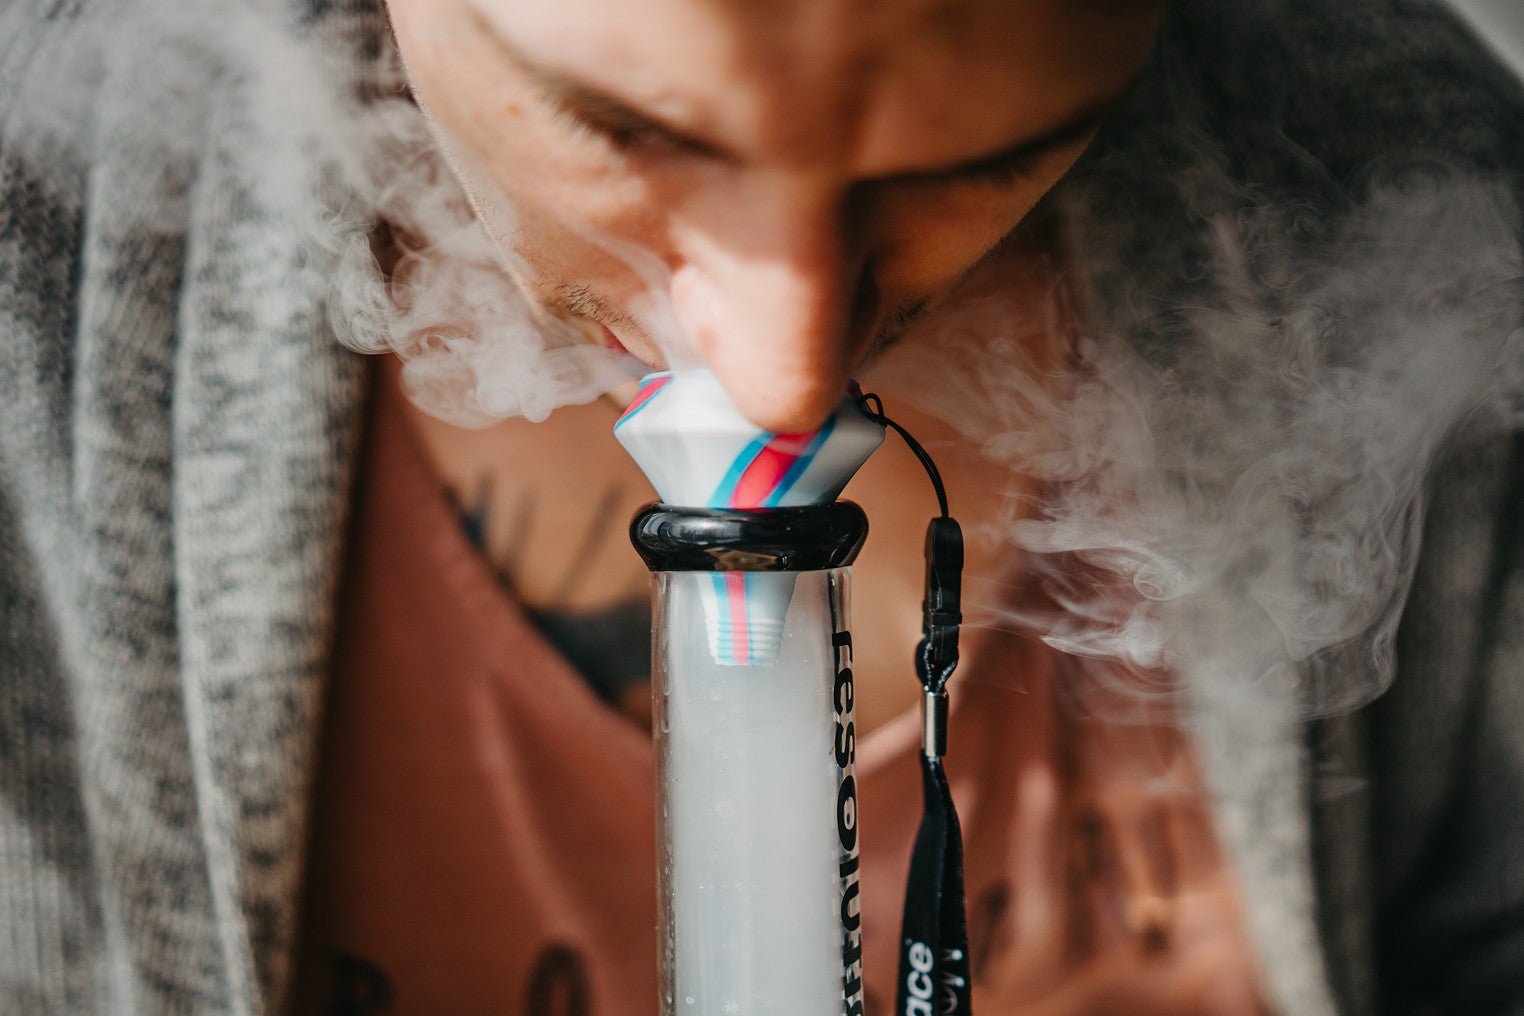 Explore more about Bubble base bongs before getting one